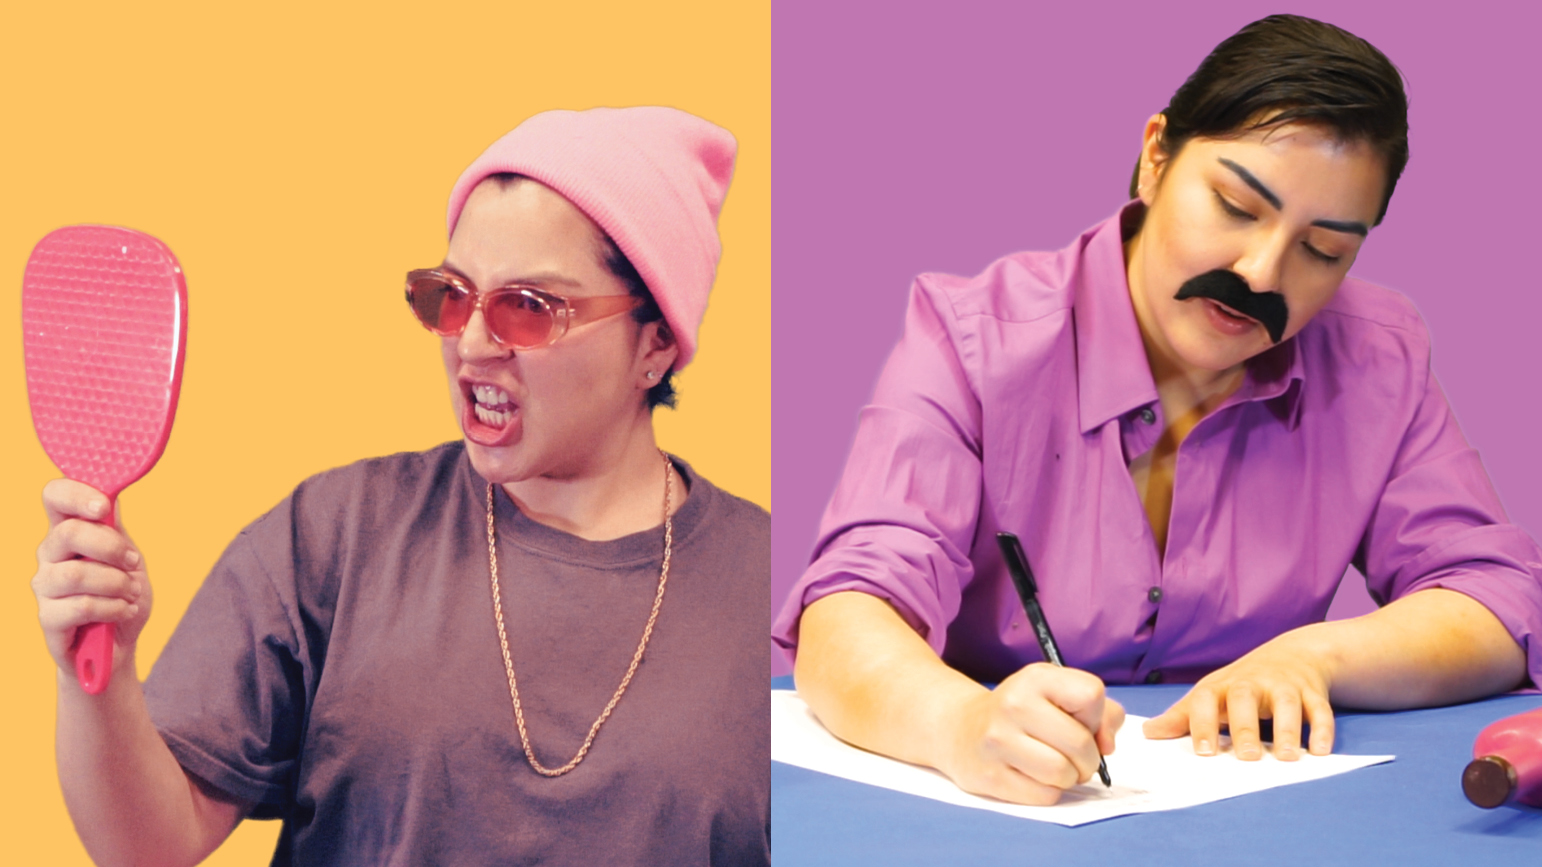 Two images of artist Nathalie Moreno dressed as Latino characters. In the first image, she is looking into a hand-held mirror with a grimace. The second image is her with a mustache writing at a table.